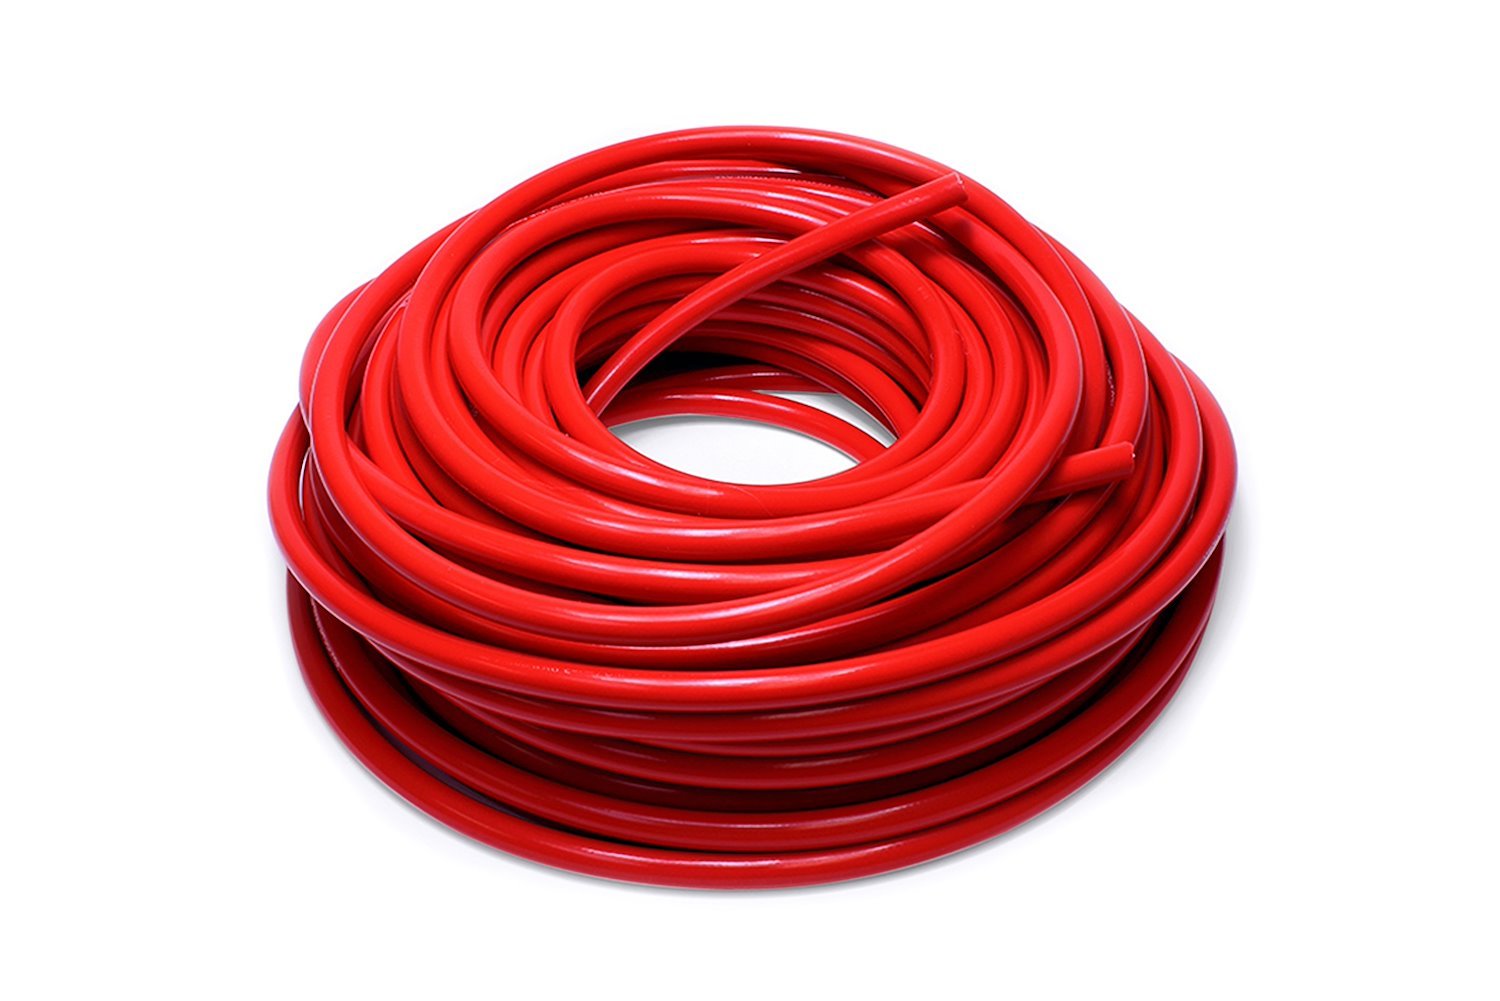 HTHH-013-REDx50 Silicone Heater Hose Tubing, High-Temp Reinforced, 1/8 in. ID, 50 ft. Roll, Red